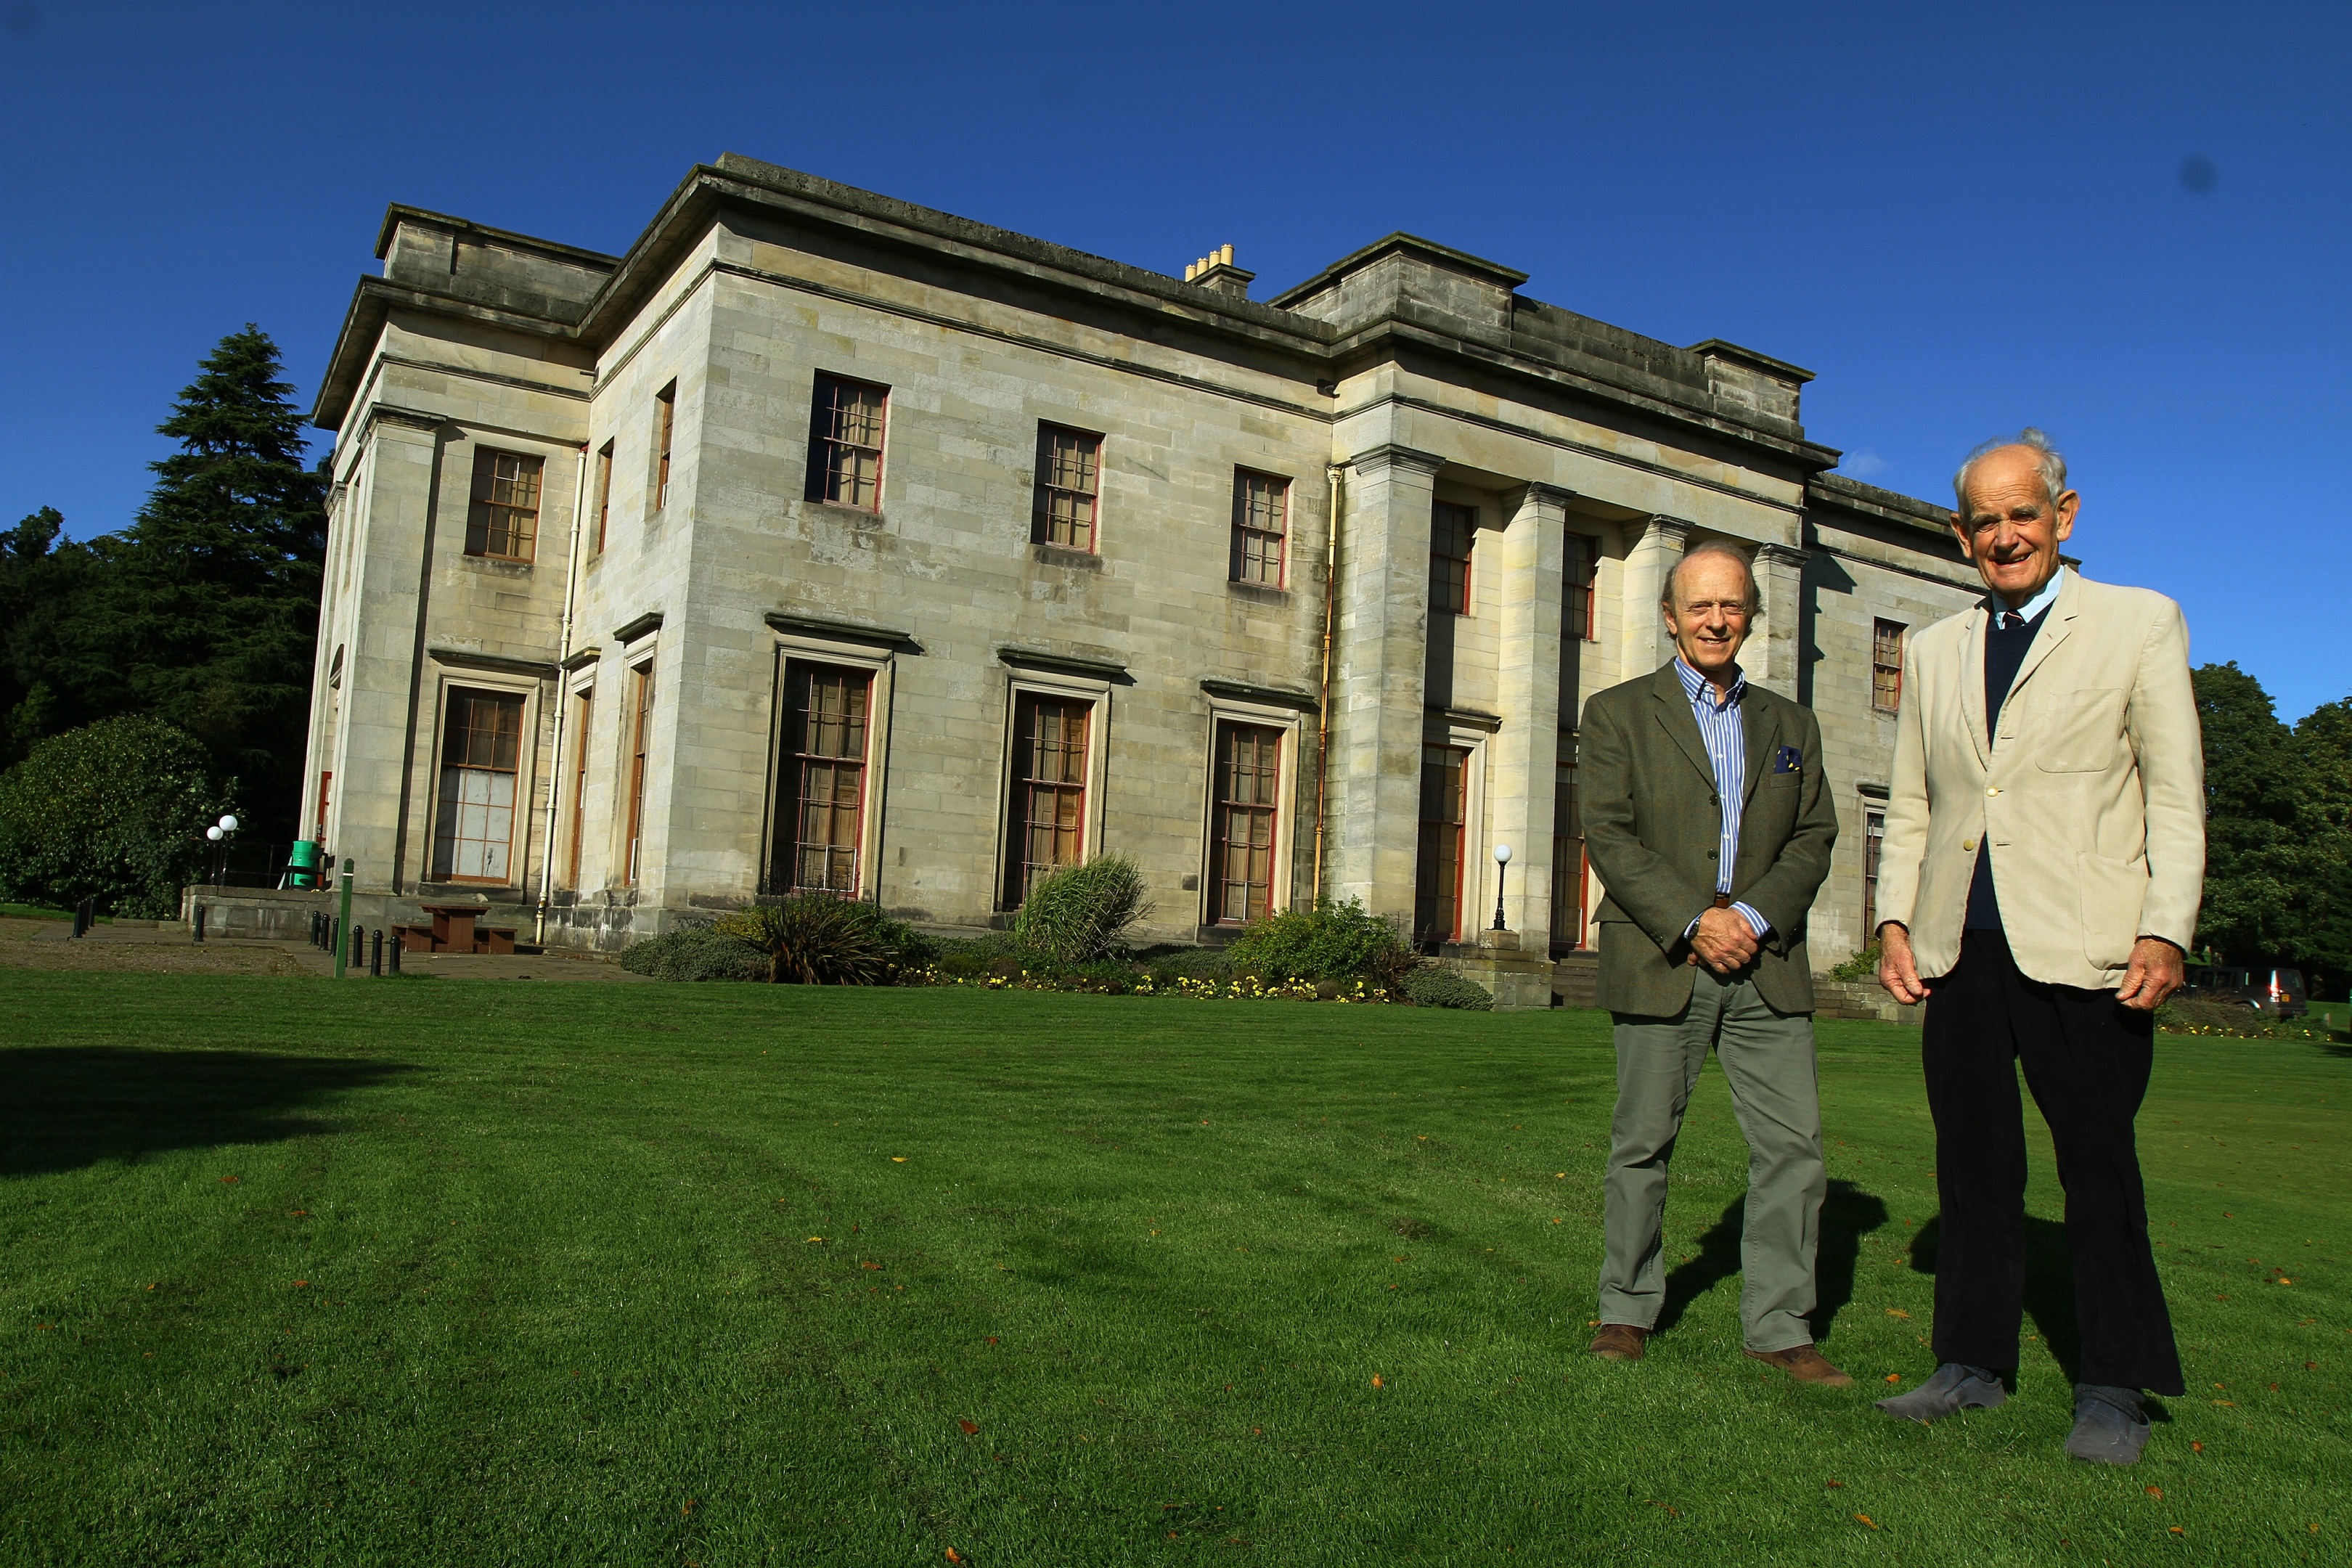 Captain James Crawford, Chairman of the Friends Of Camperdown House, and John Picton - Committee Member at Camperdown House